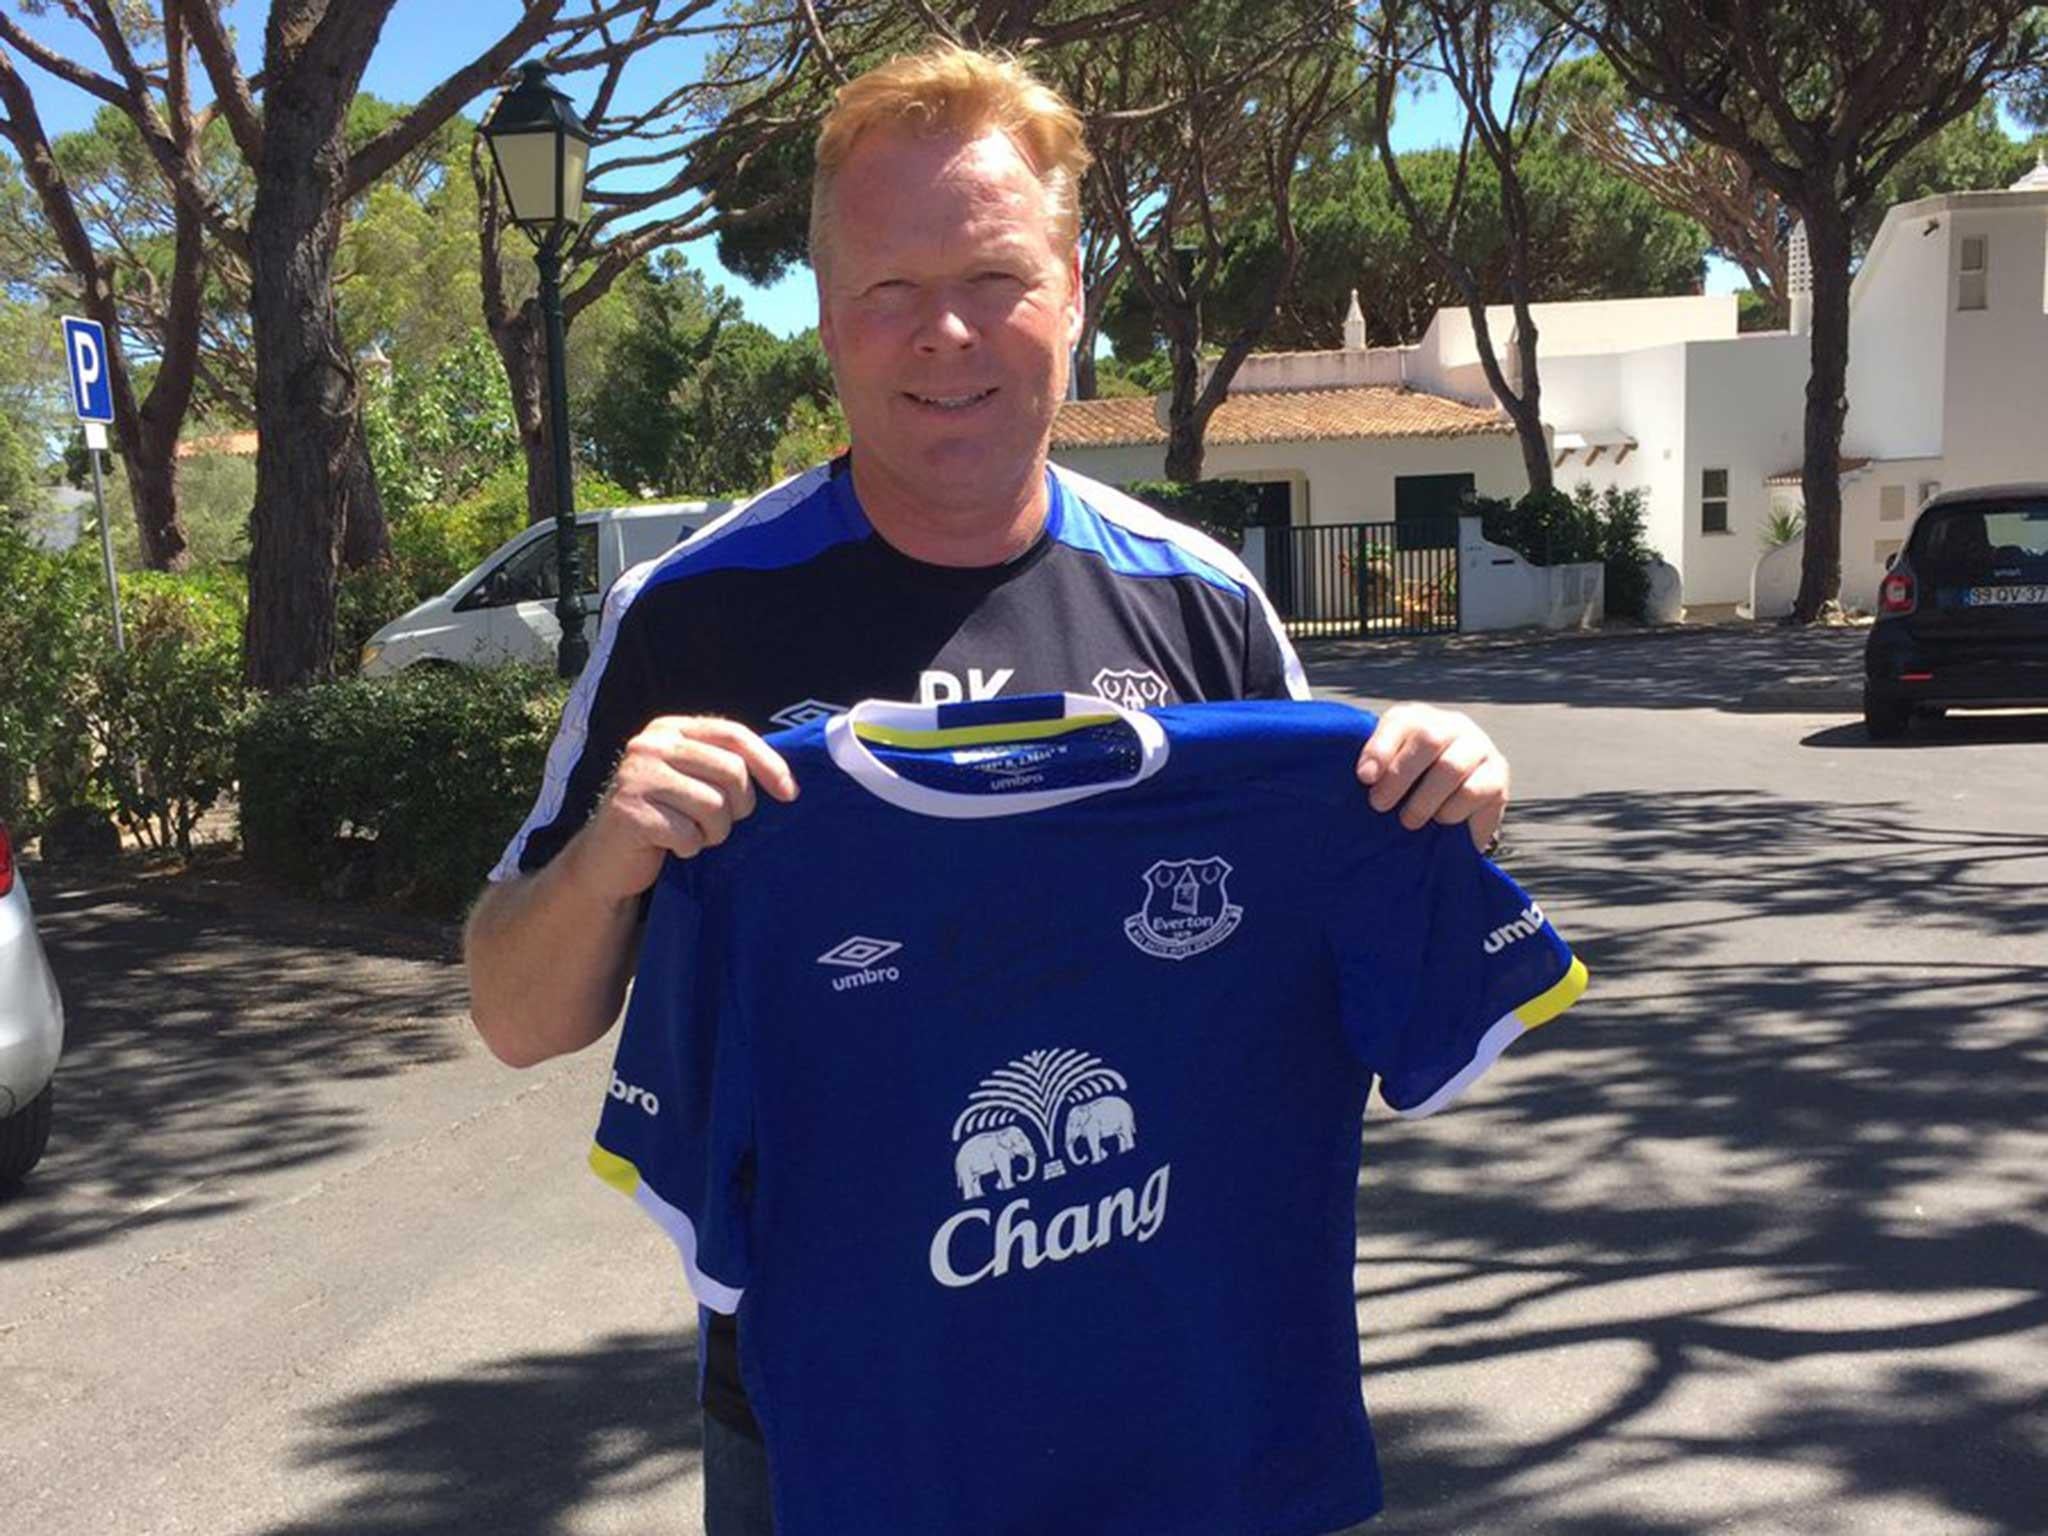 Ronald Koeman posted a picture with an Everton shirt on his Twitter account following the official announcement